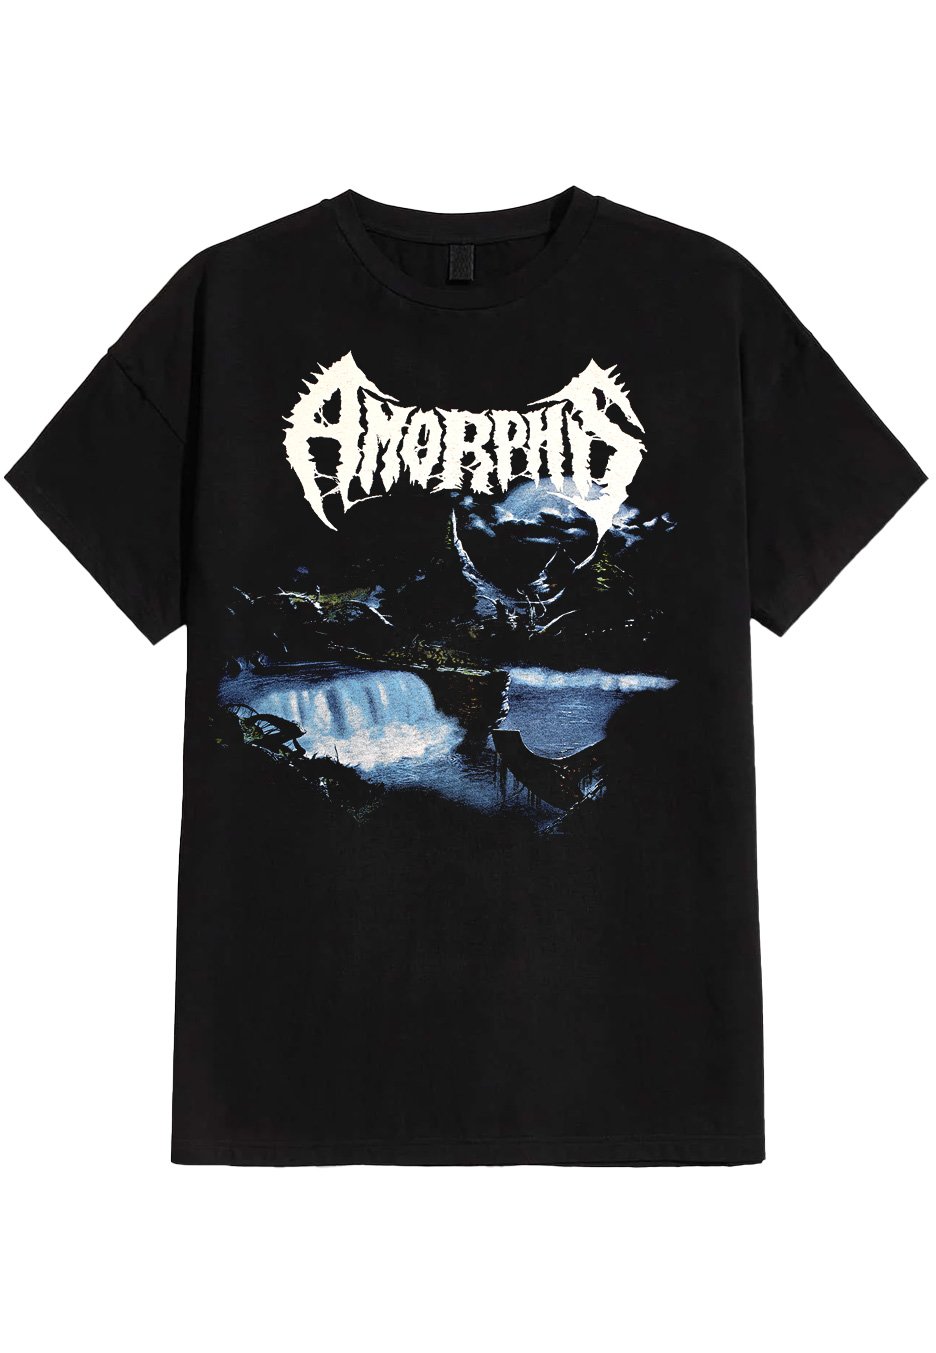 Amorphis - Tales From The Thousand Lakes - T-Shirt